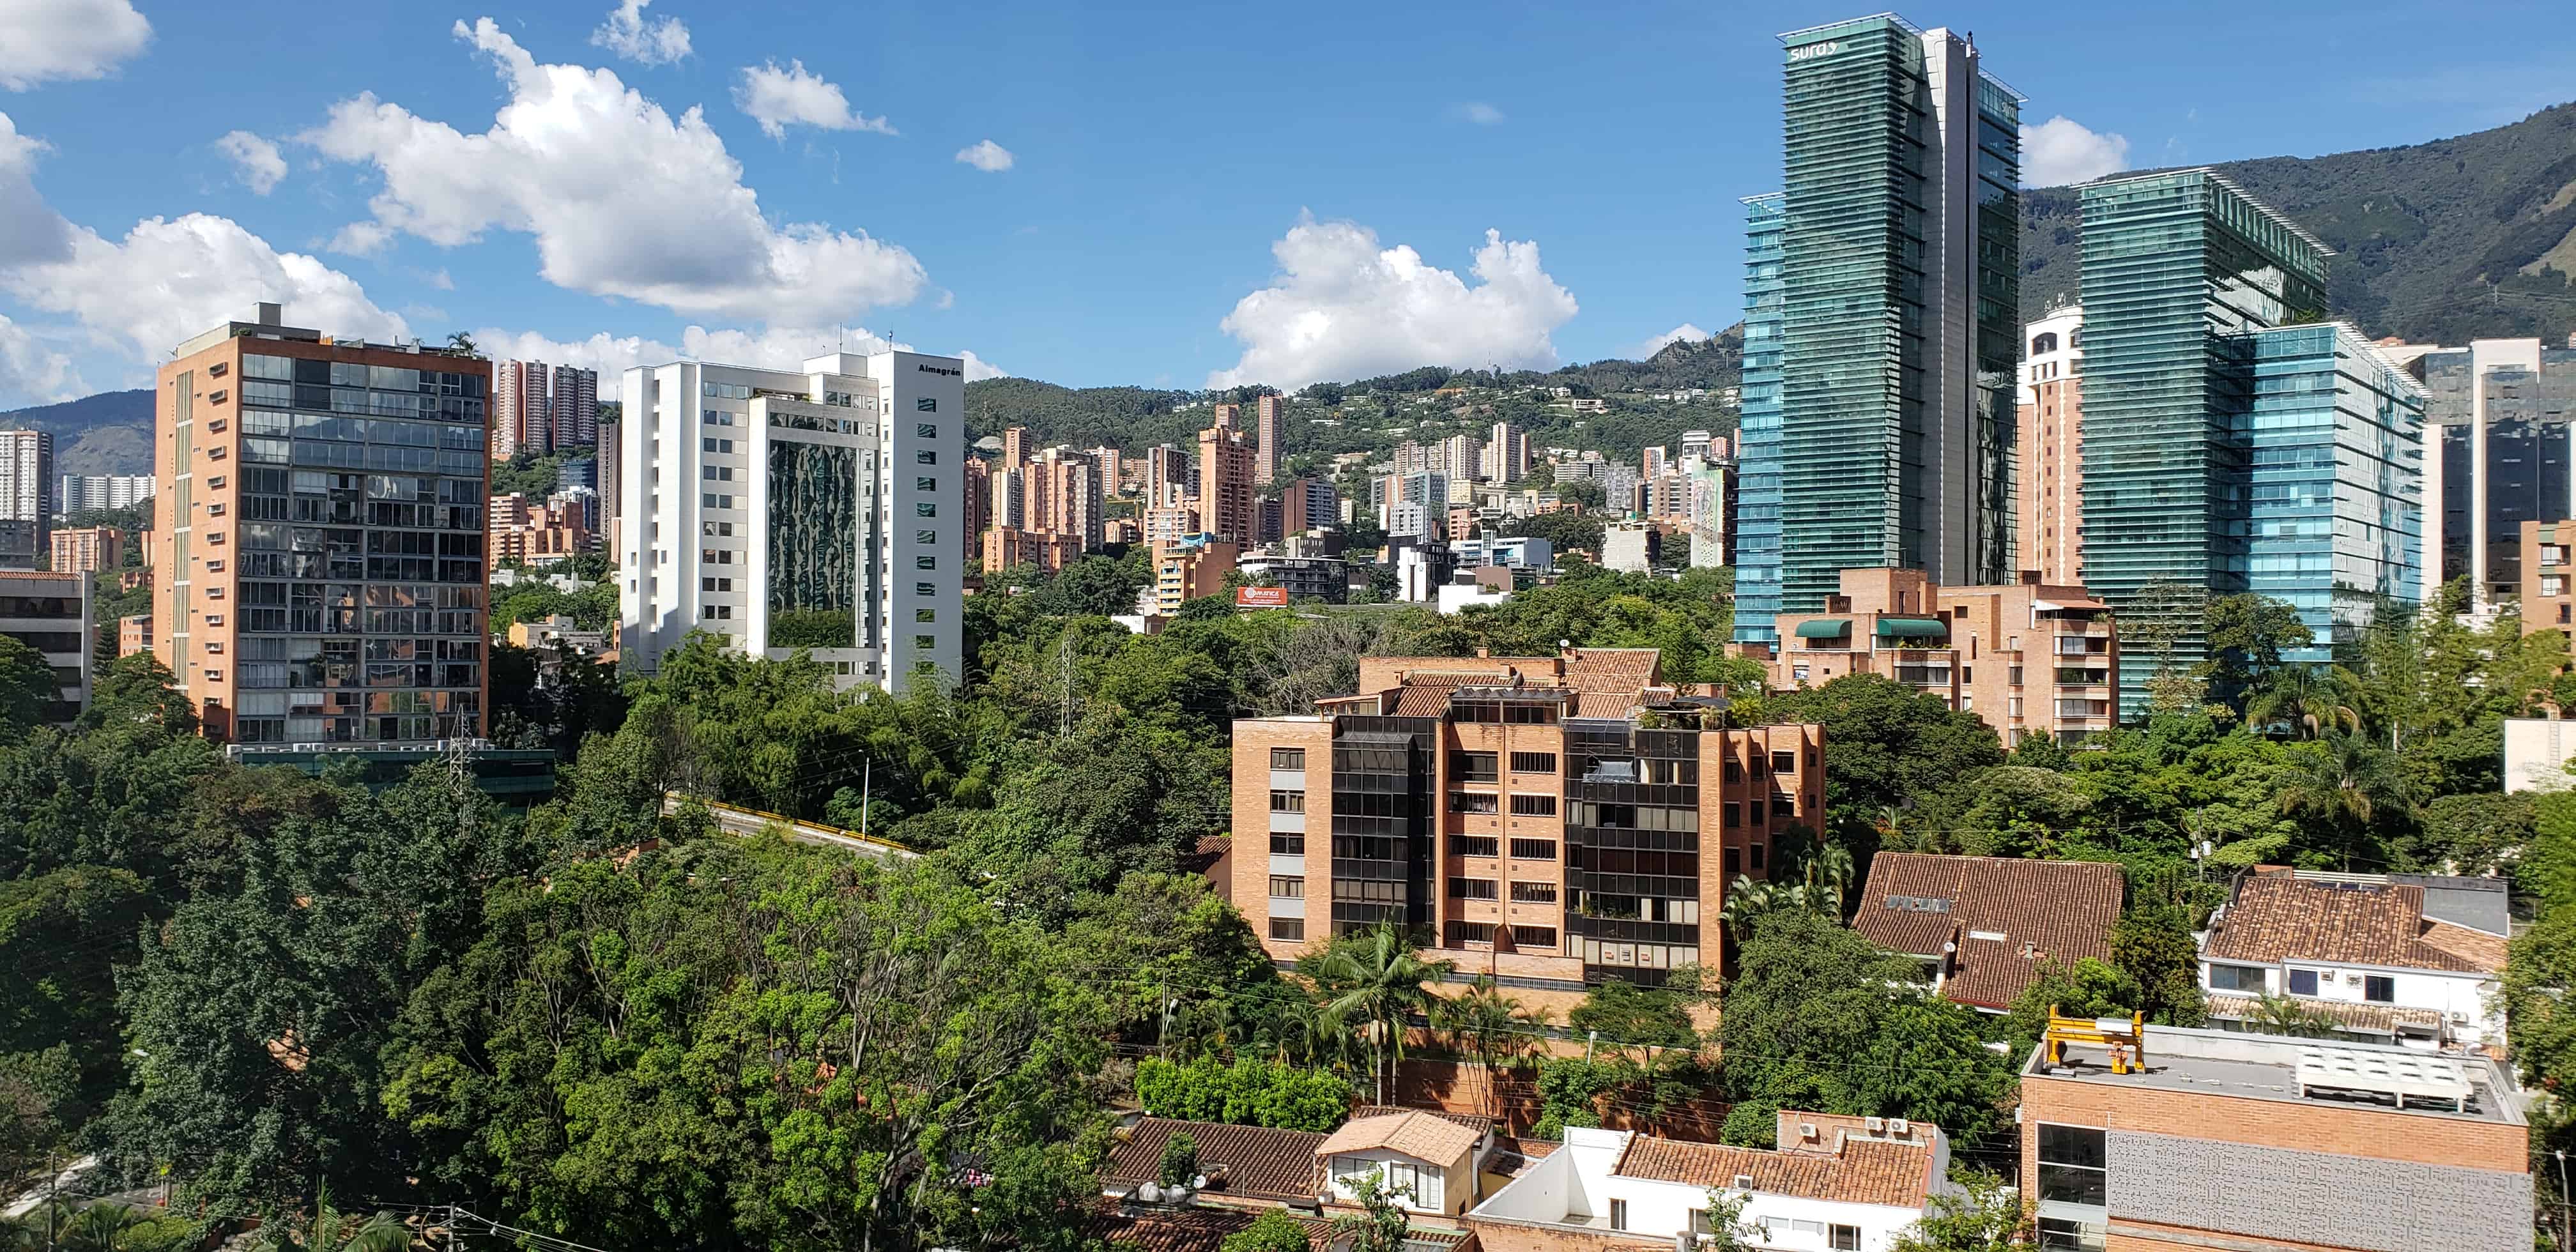 View of Medellin - Why Visiting Medellin Should Be on Your Wish List